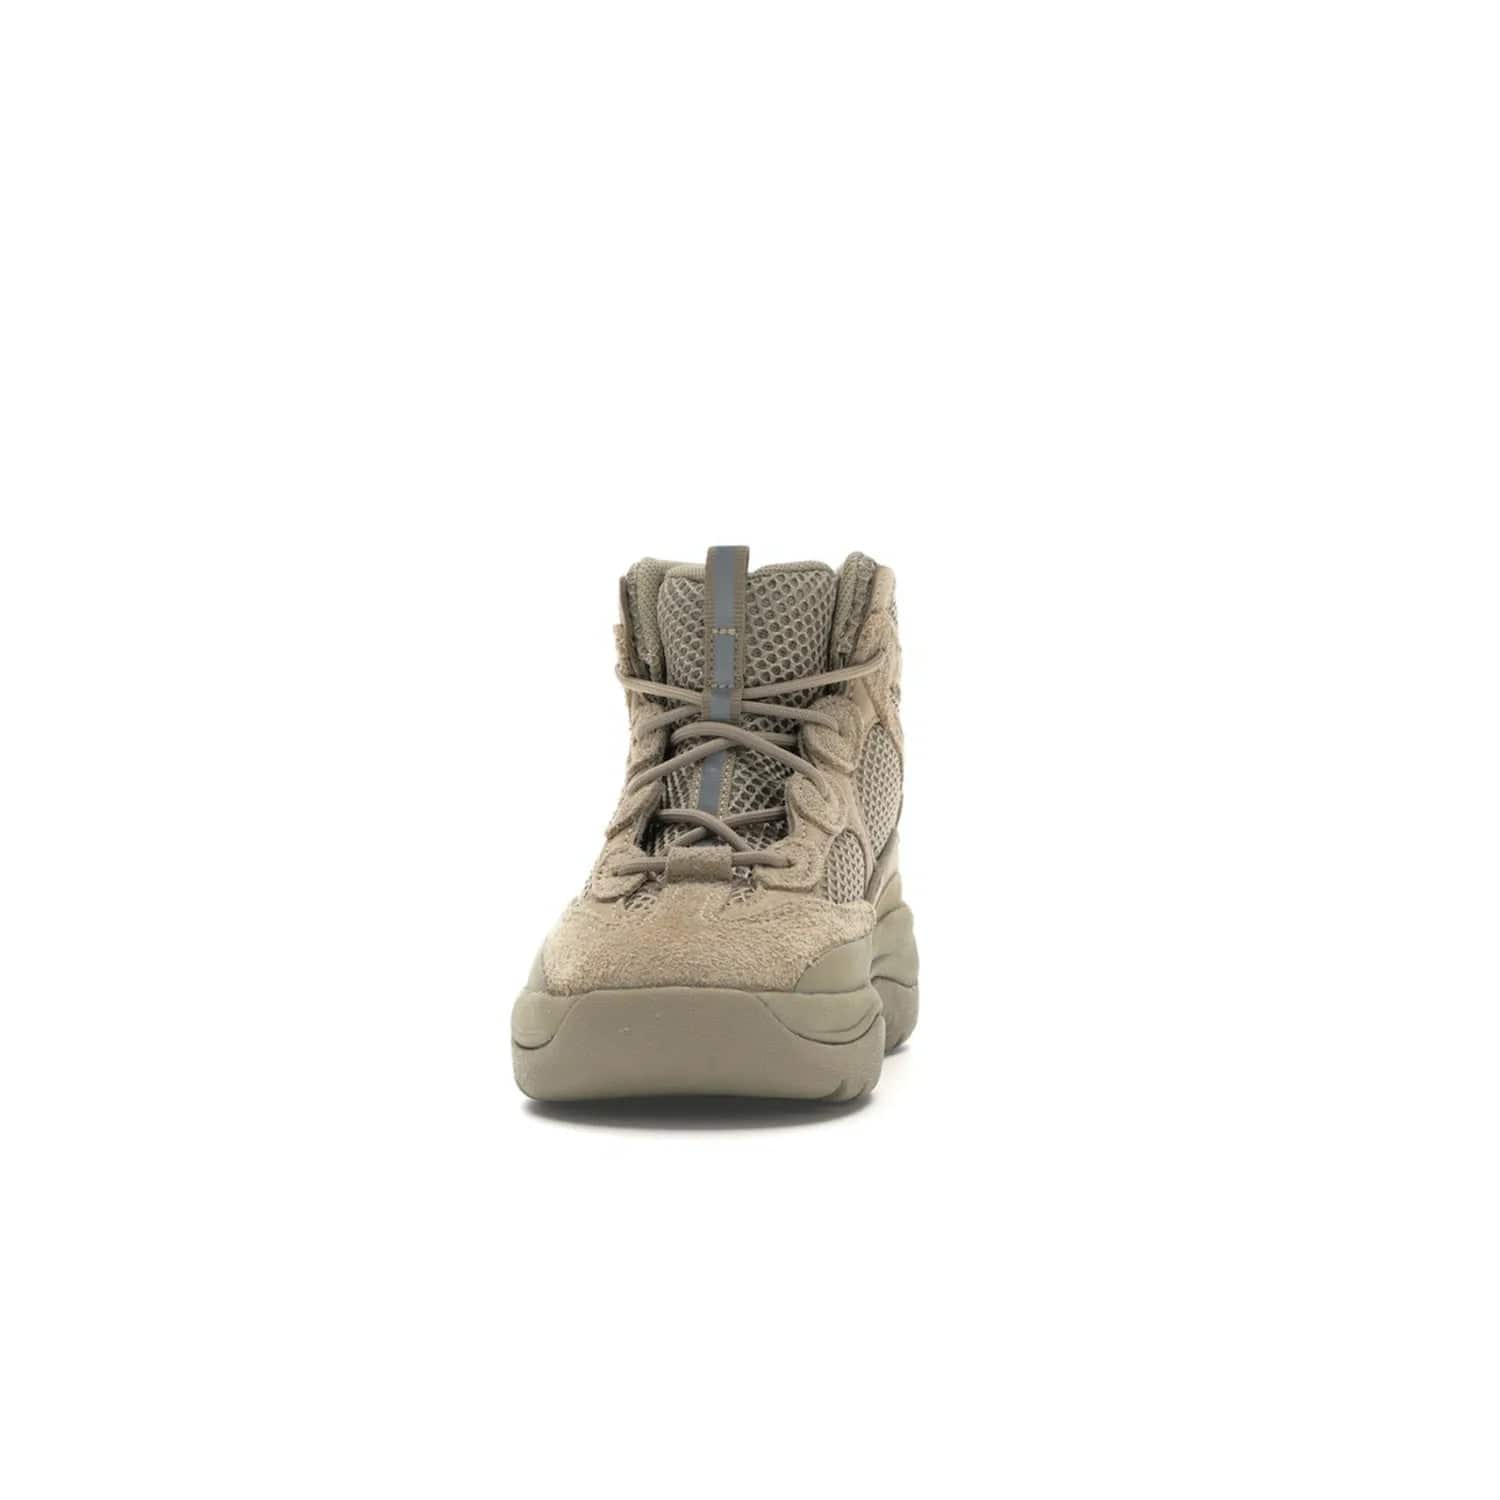 adidas Yeezy Desert Boot Rock (Kids) - Image 11 - Only at www.BallersClubKickz.com - Elevate your style this season with the adidas Yeezy Desert Boot Rock. Crafted from layered nylon and suede, this chic kids' silhouette features an EVA midsole and rubber outsole for superior cushioning and traction.